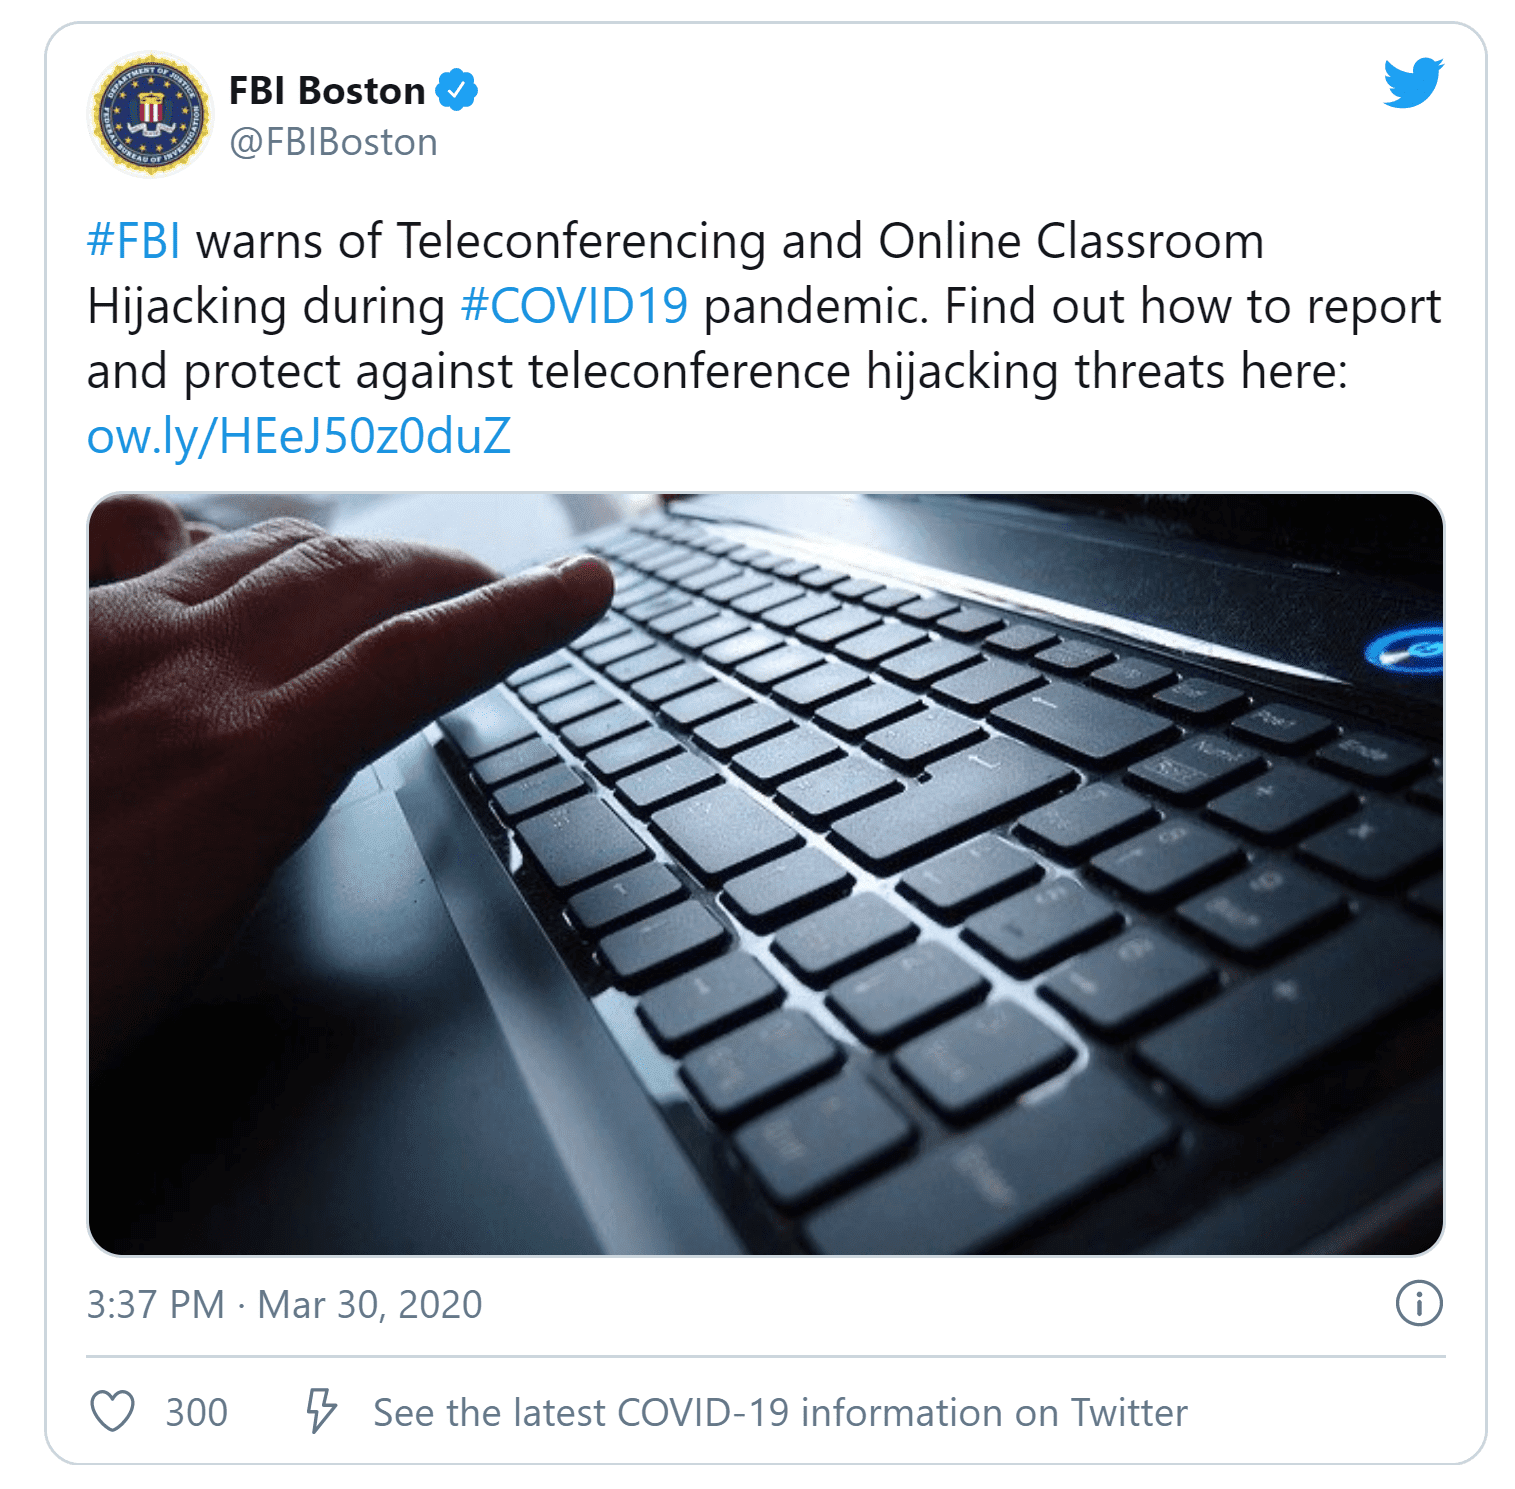 Tweet of FBI warning on hijacking of teleconference and online classrooms